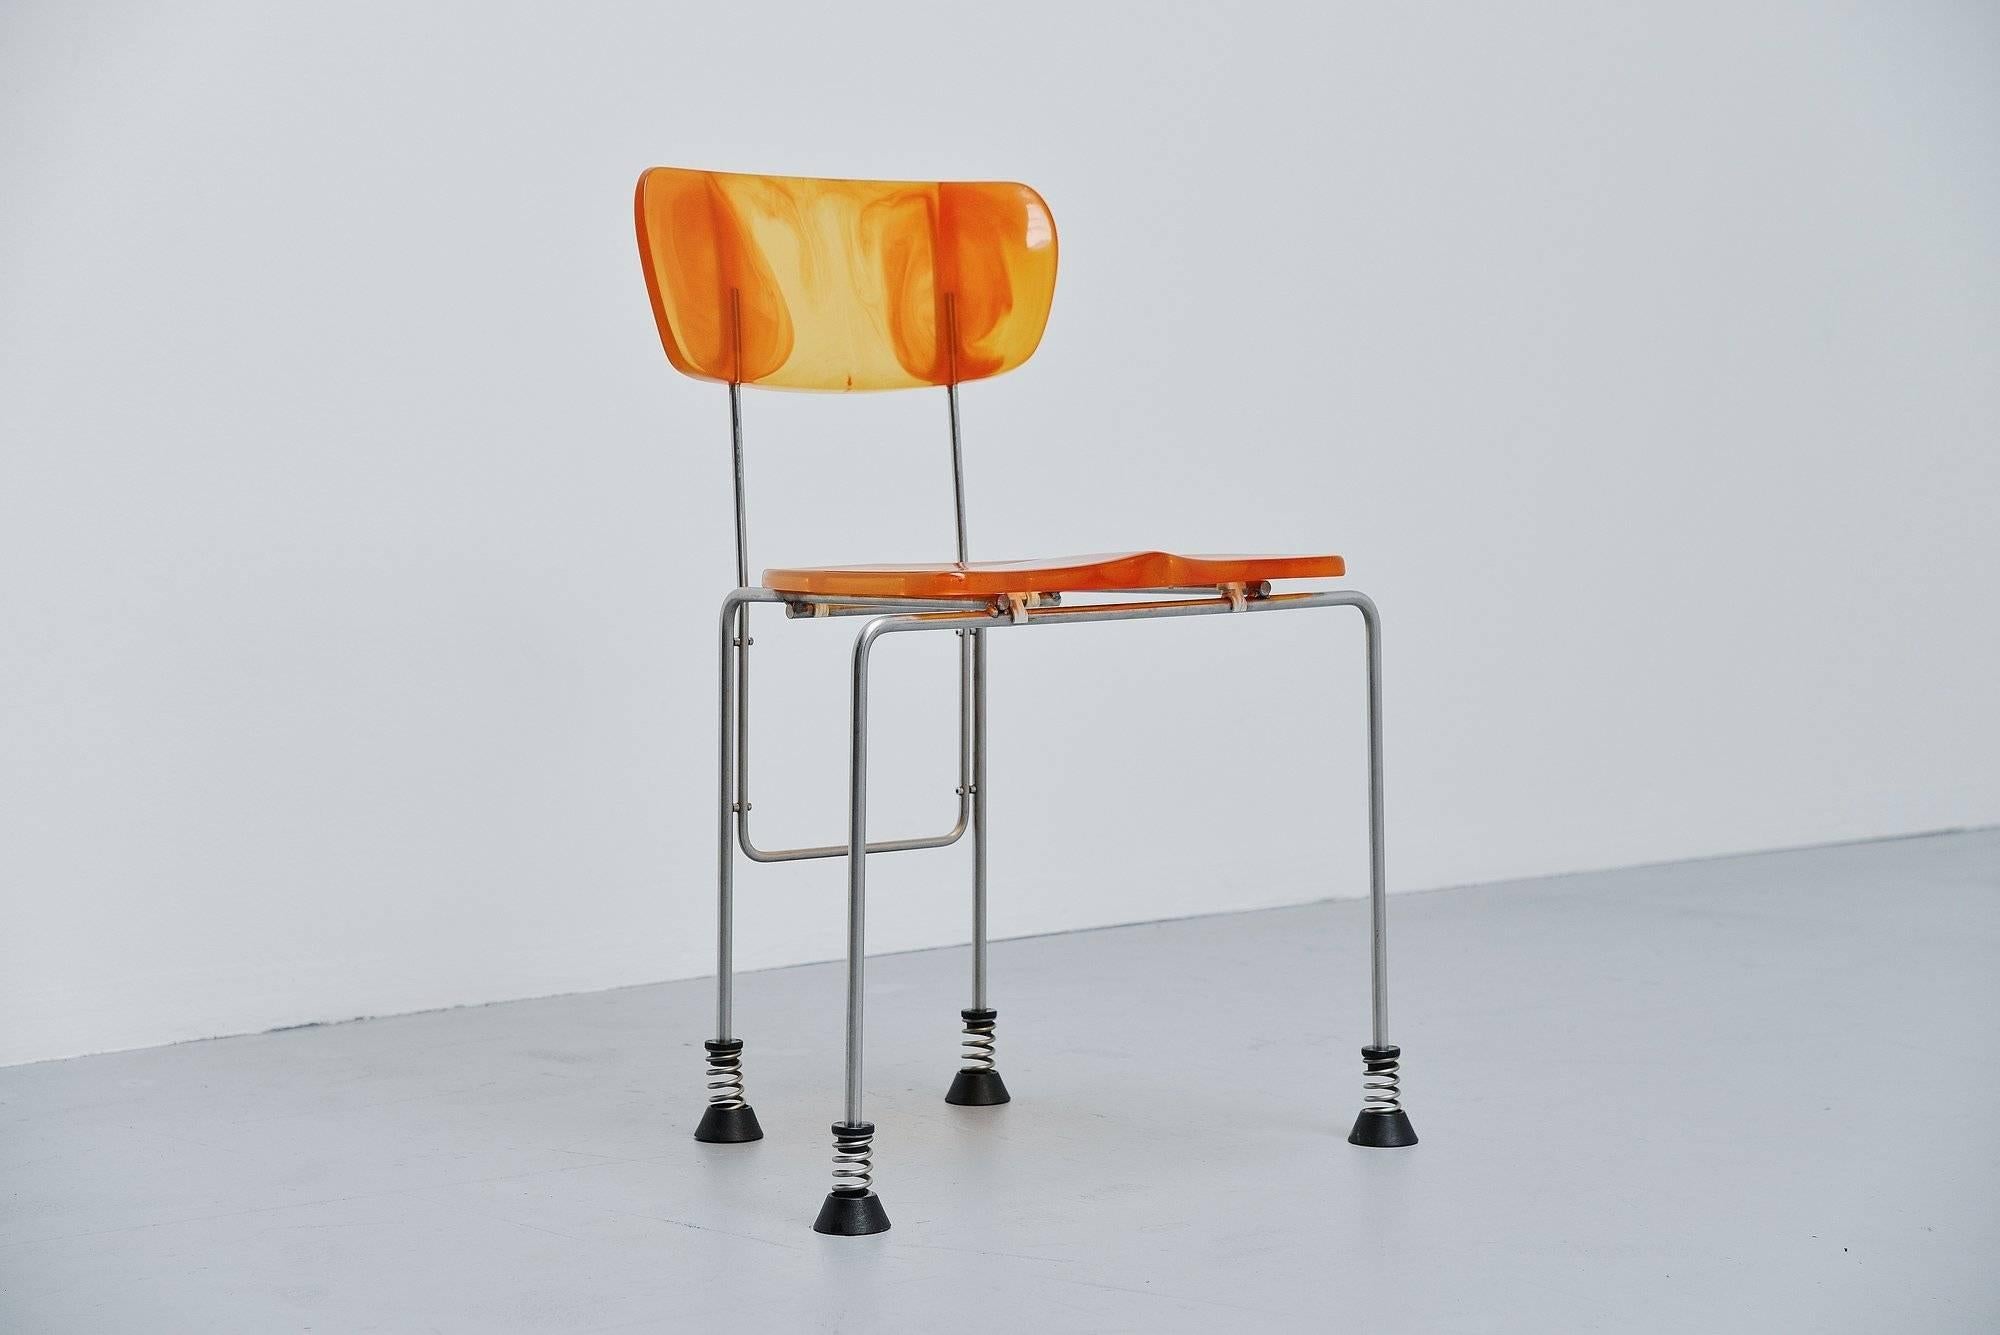 Sculptural 'Broadway' side chair designed by Gaetano Pesce and manufactured by Bernini, Italy, 1993. The chair is made of orange resin molded plastic. And has 4 brushed steel legs with spring feet. The chair is in good condition and marked with the